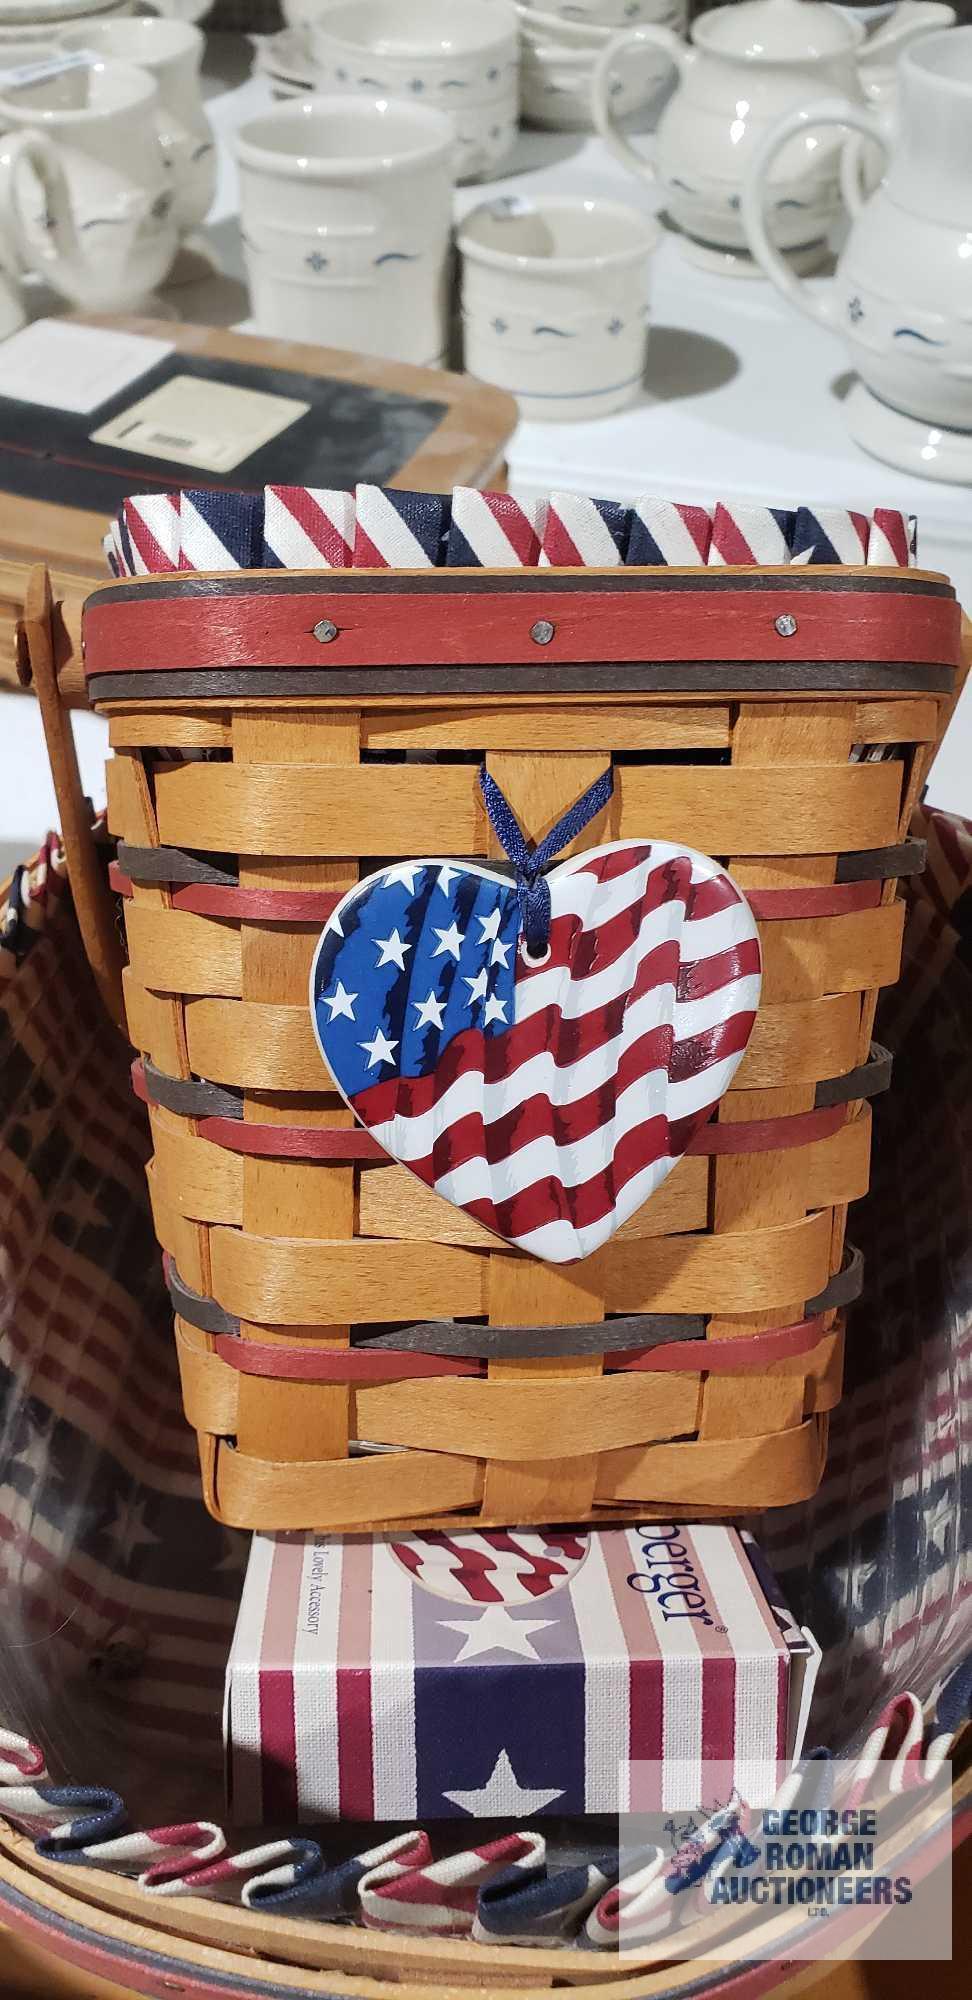 Longaberger 1995, 1998, and 1999 red and blue striped baskets